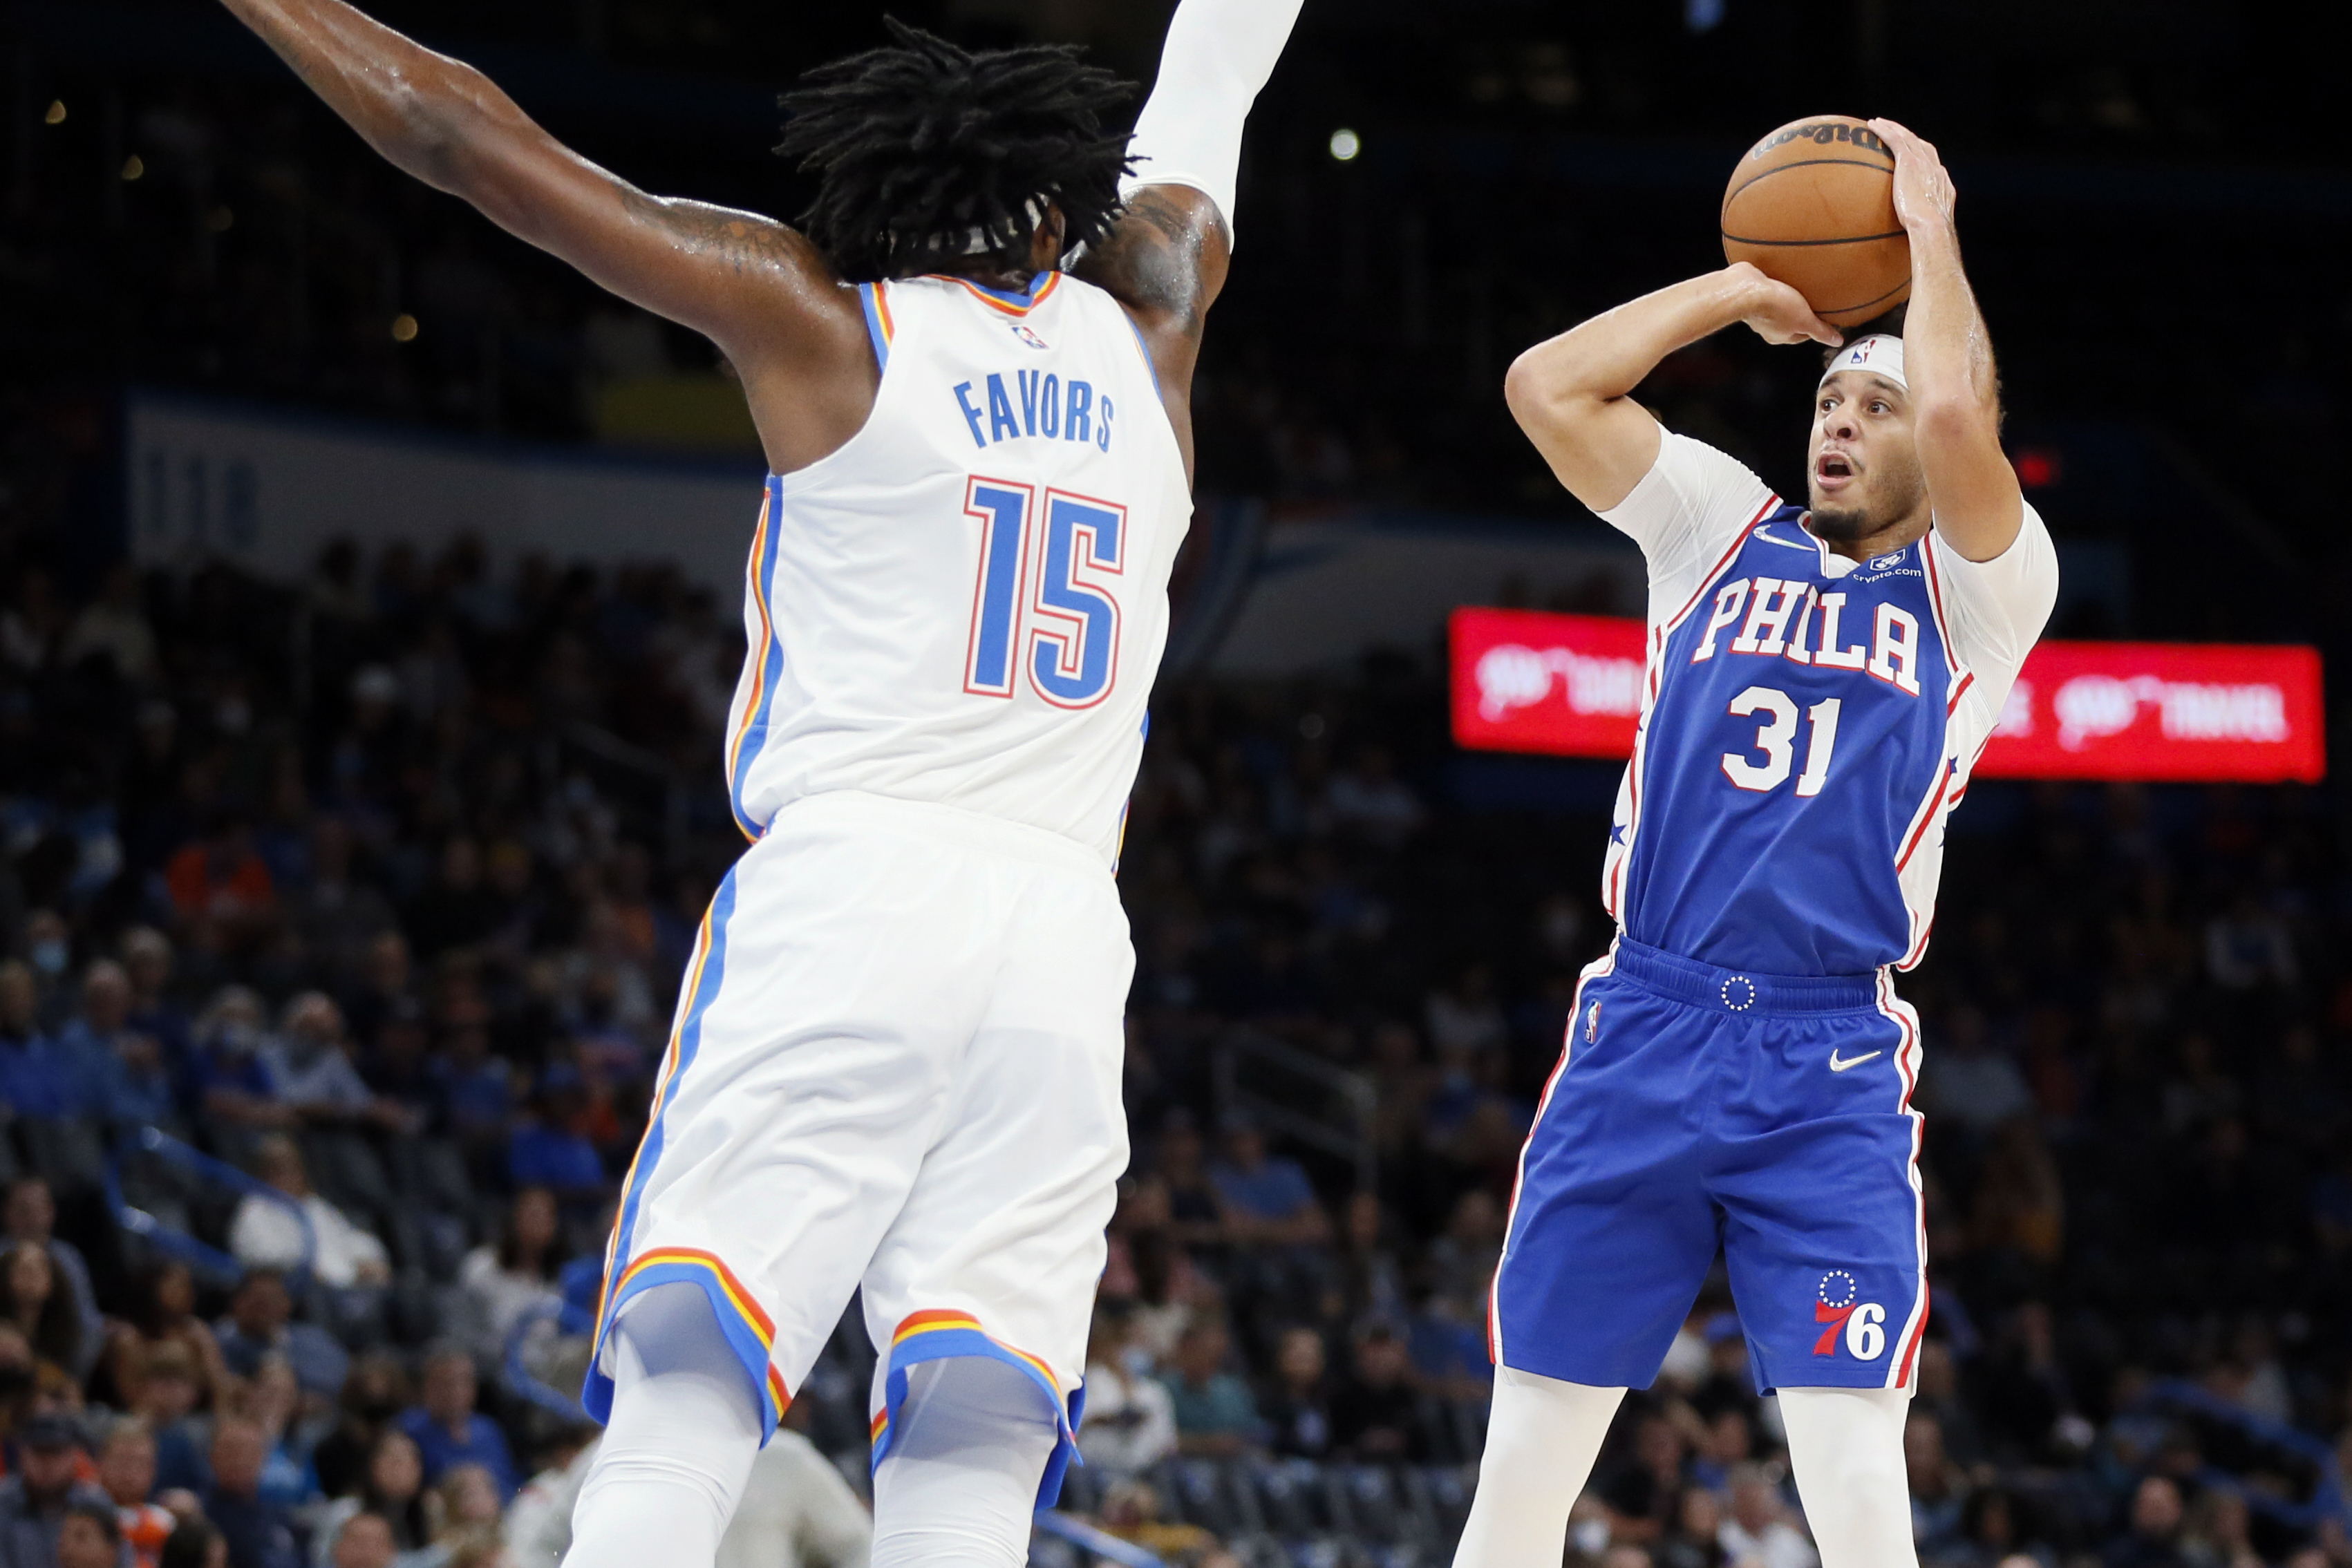 Sixers vs. Thunder analysis: Seth Curry sparks 115-103 win in Oklahoma City